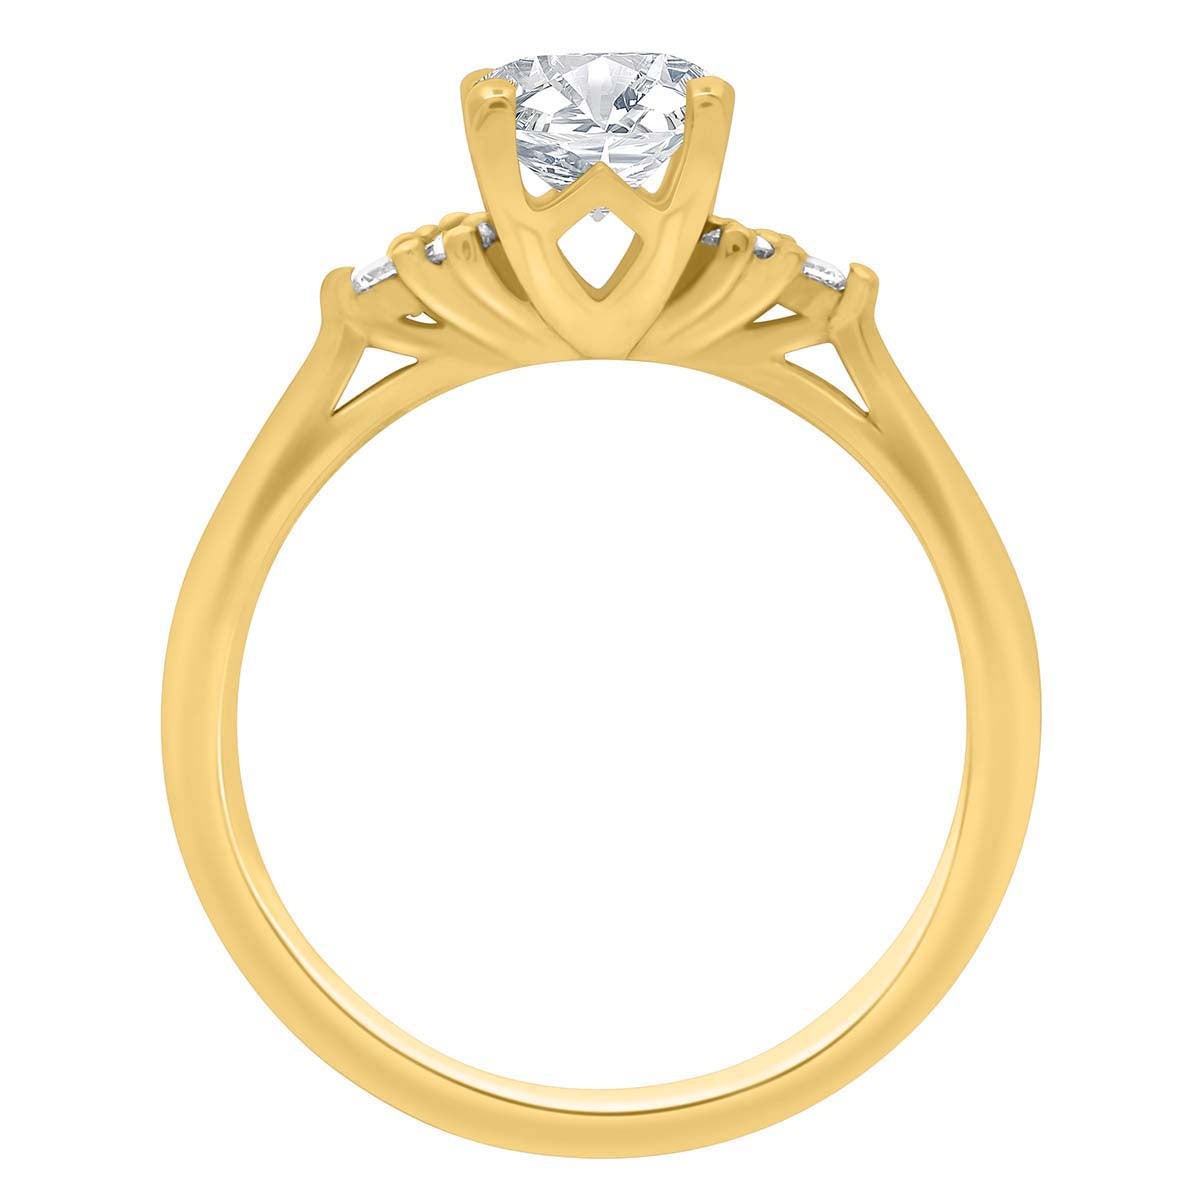 Handmade Engagement Ring in yellow gold standing vertical